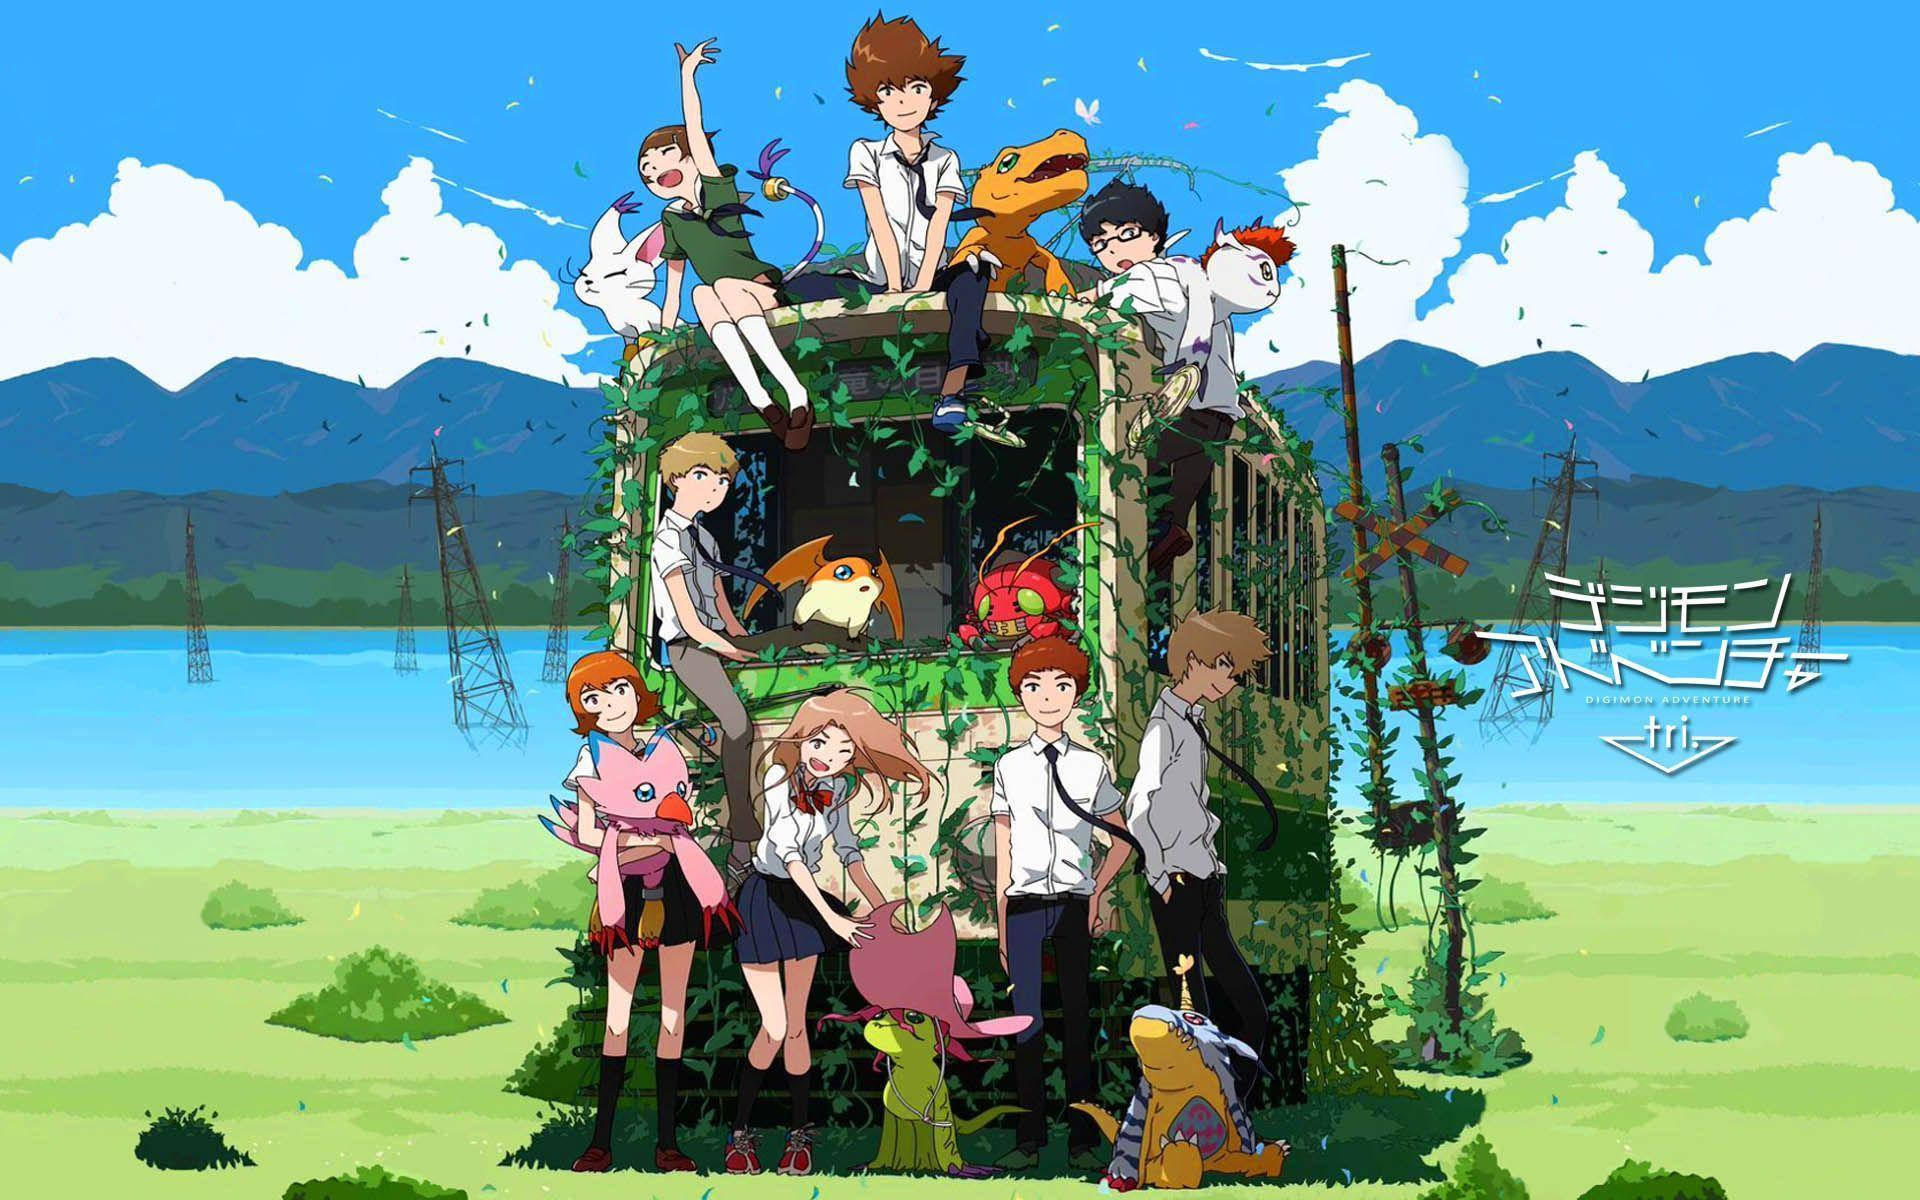 41 Digimon Wallpapers & Backgrounds For